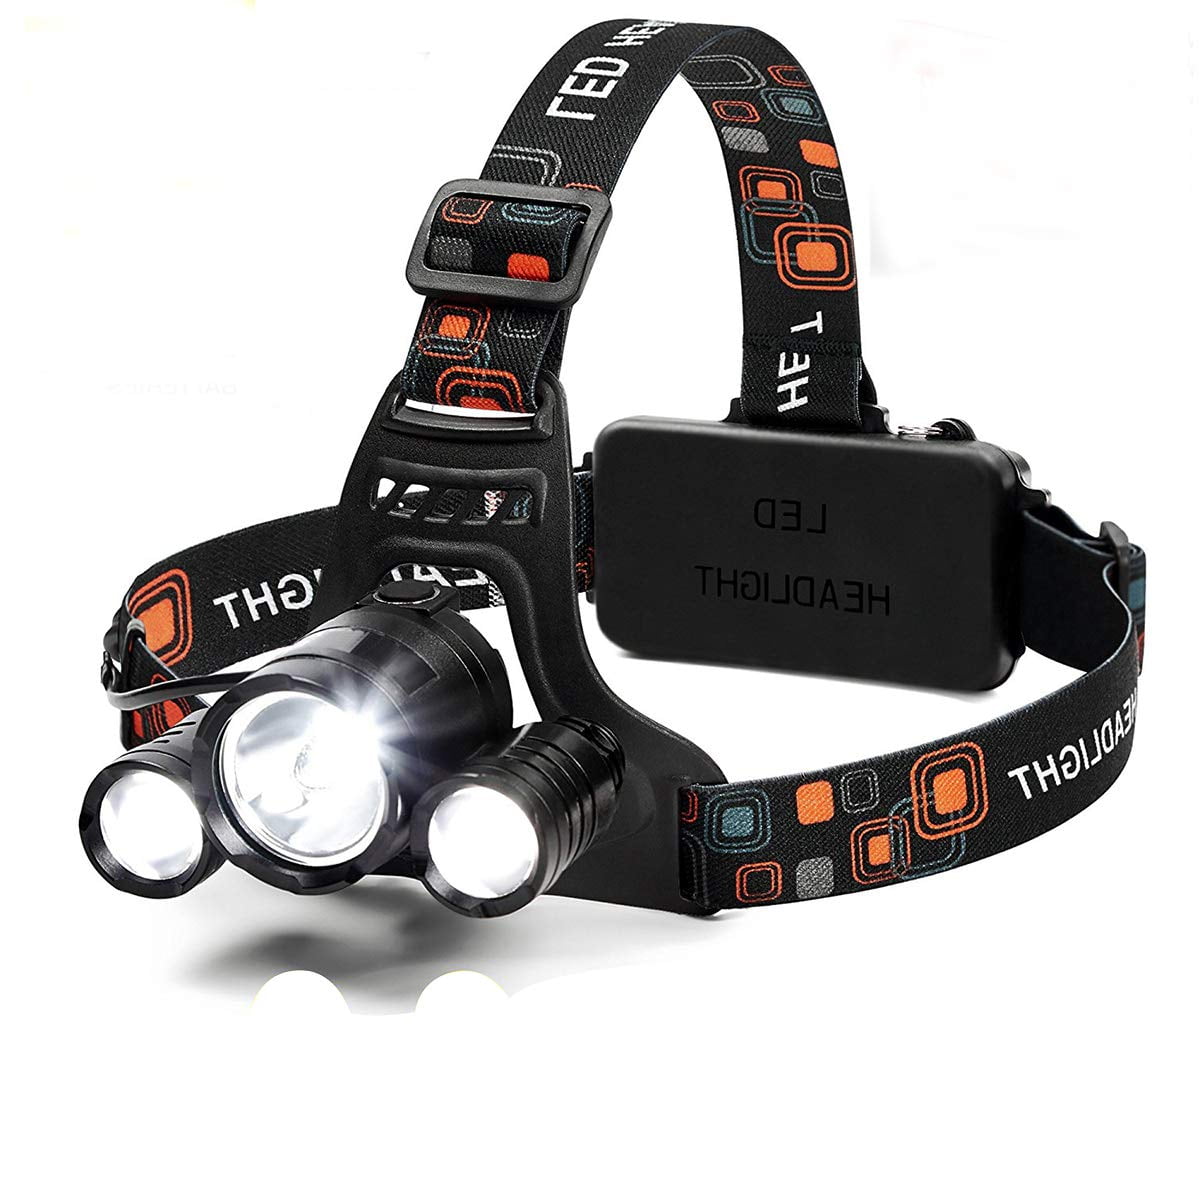 Details about   2x 8000Lm LED Headlamp Rechargeable Motion Sensor Headlight Camping Torch Lamp 